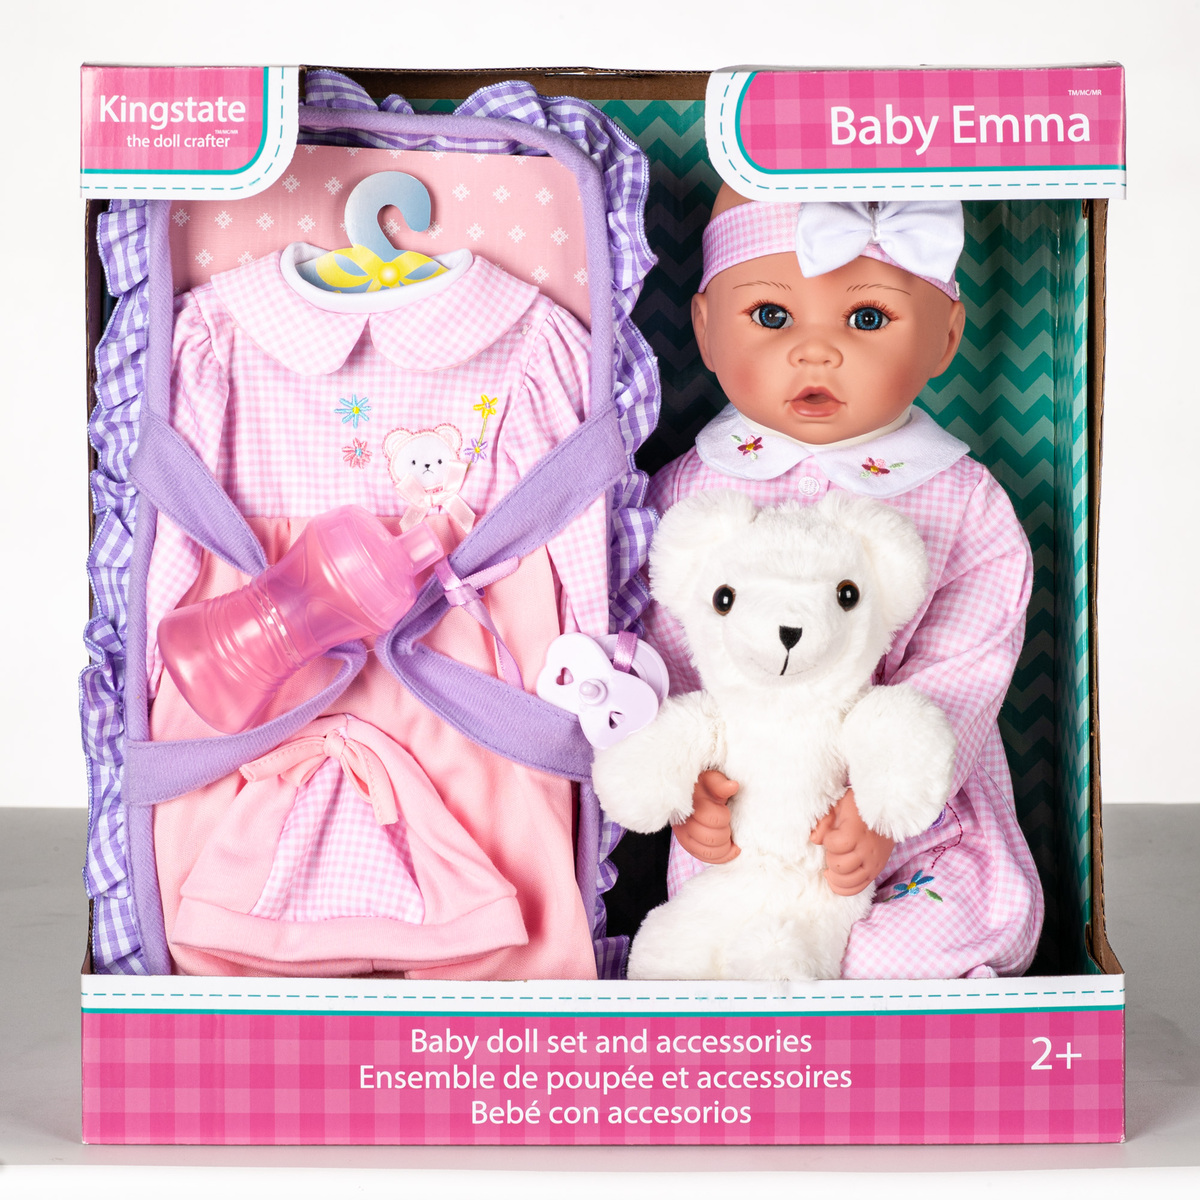 Kingstate Doll Quality Set UK Big Box Baby Emma Baby Doll Set and Accessories 